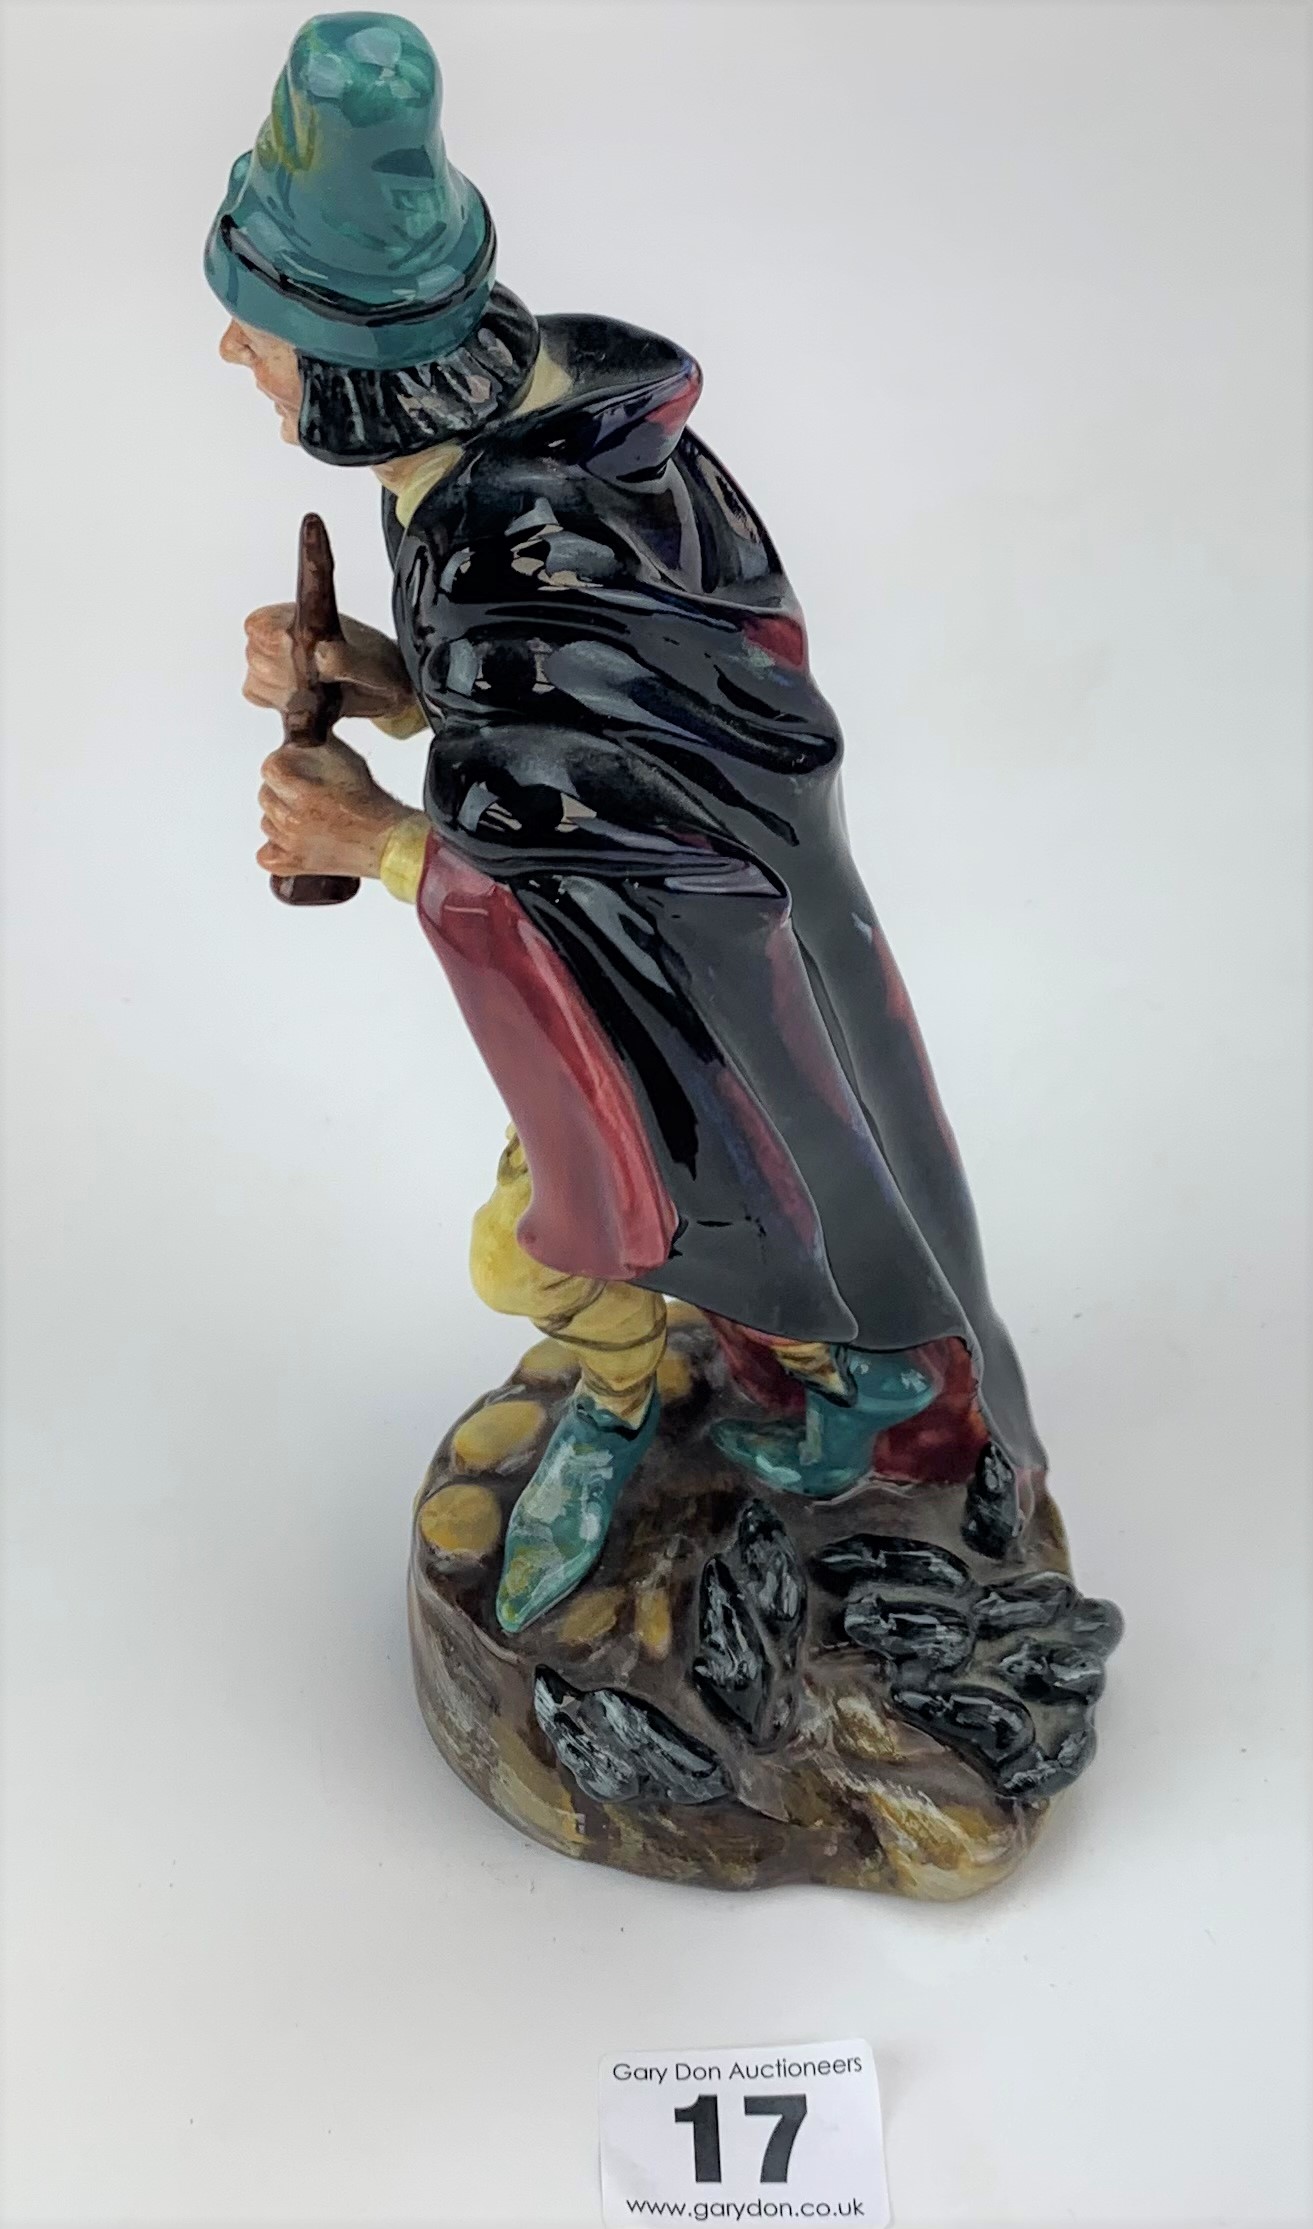 Royal Doulton 'Pied Piper' figure - Image 5 of 6